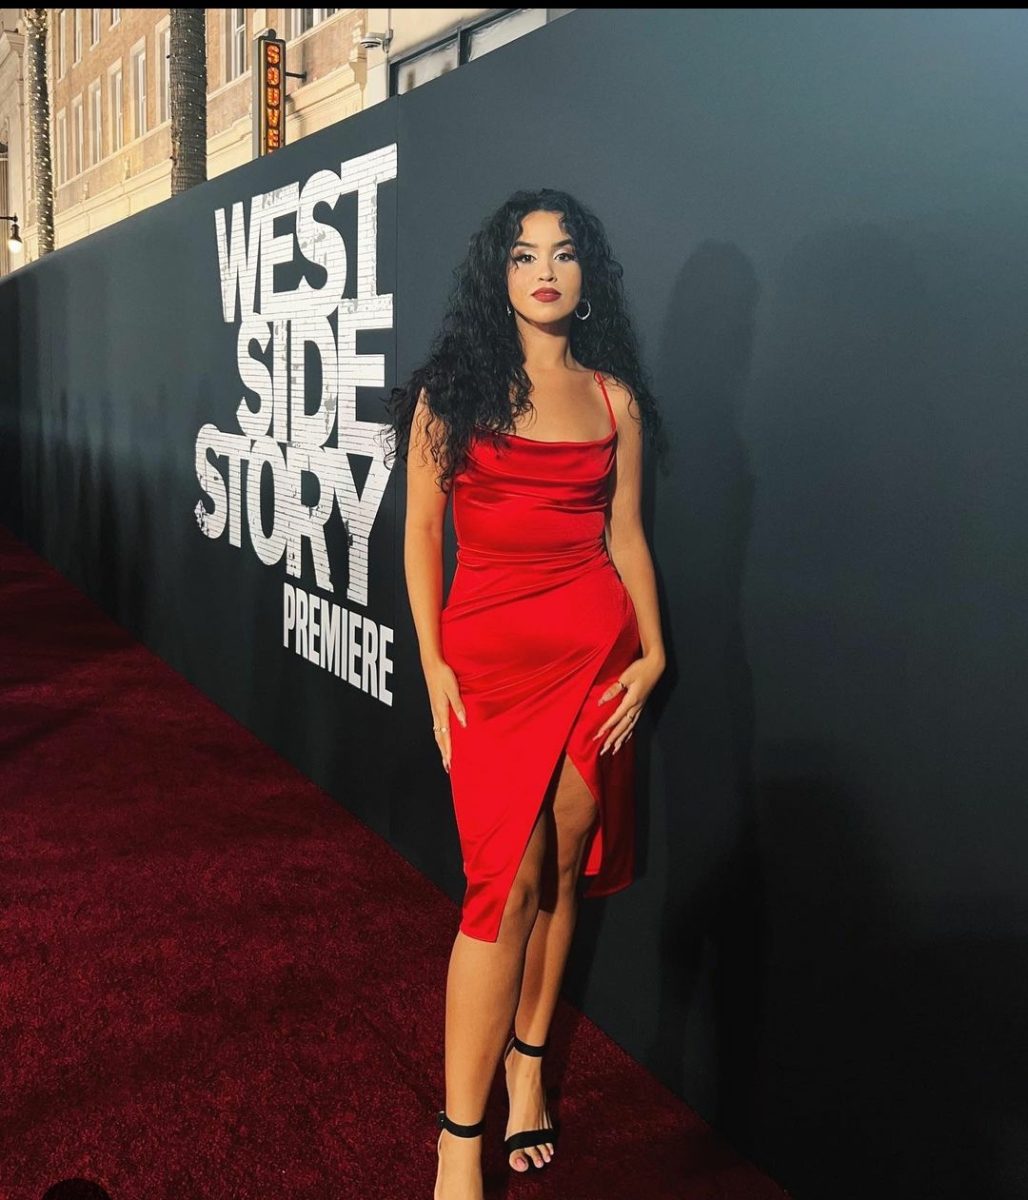 Alexia at the West Side Story red carpet Premiere.